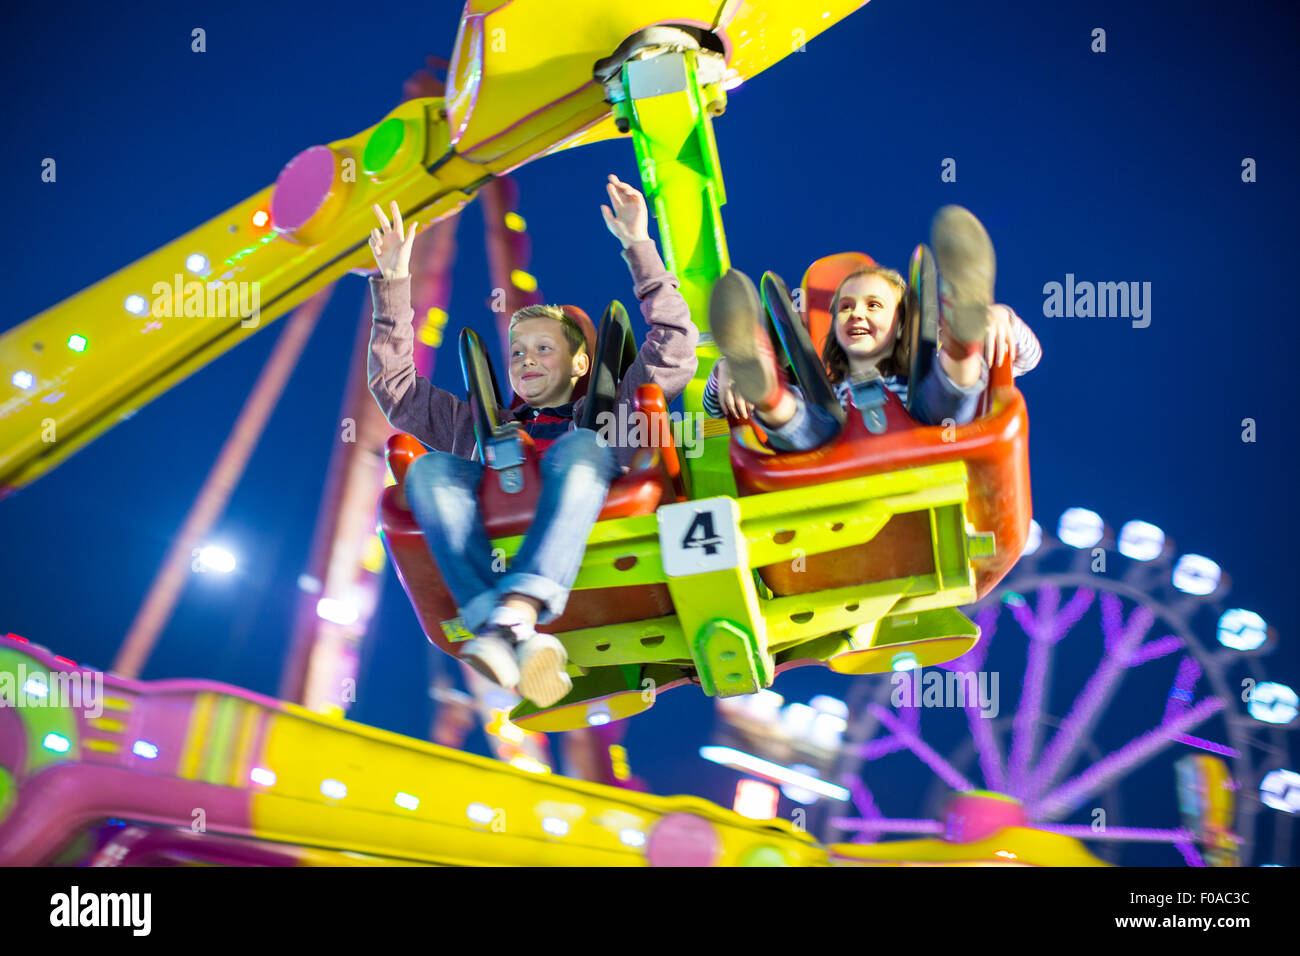 Sister and brother mid air on fairground ride at night Stock Photo